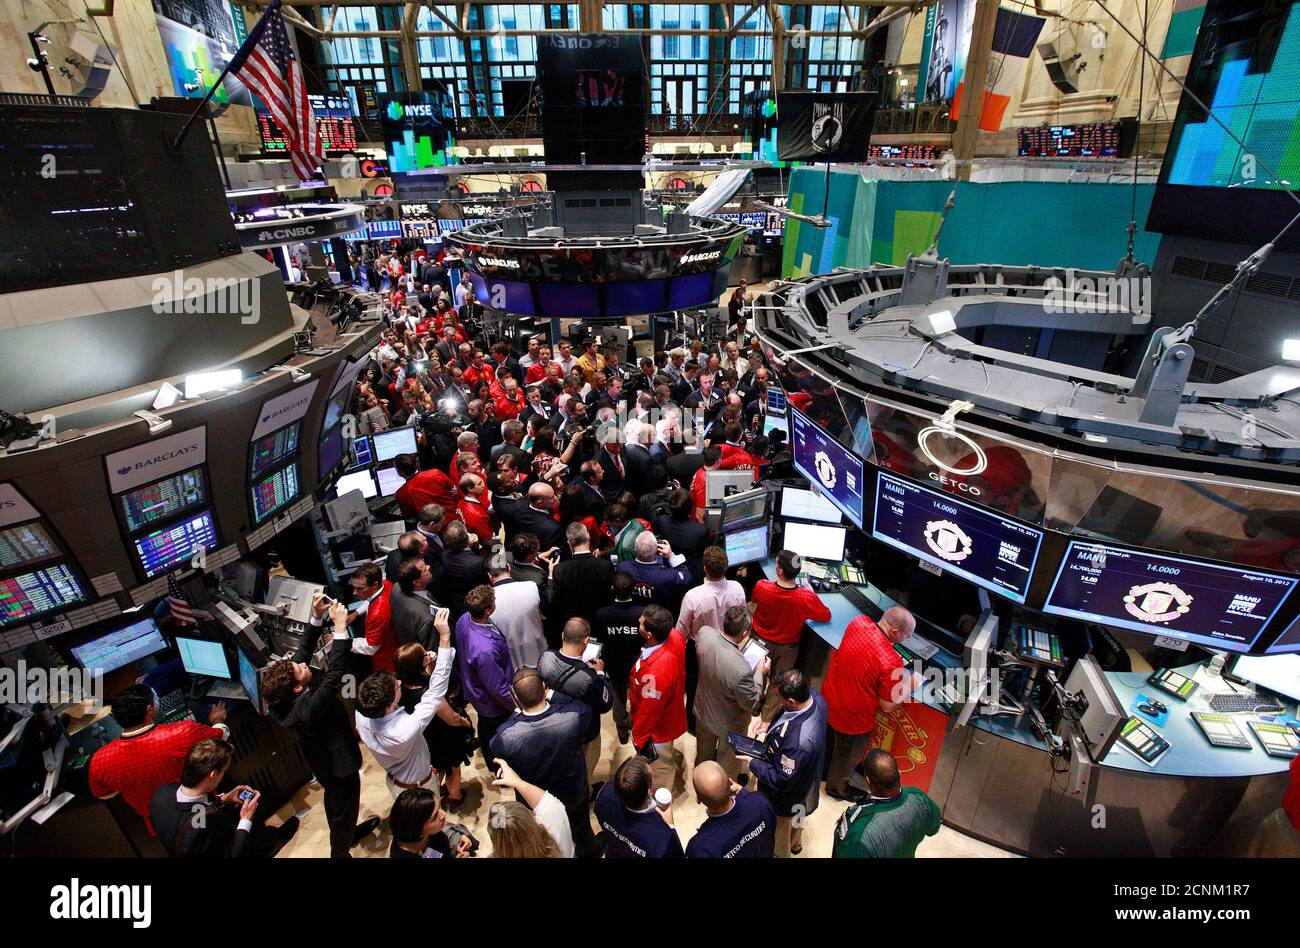 People gather at the post for the start of trading of Manchester United Ltd following its initial public offering on the floor of the New York Stock Exchange, August 10, 2012. Shares in Manchester United priced below expectations and were essentially flat in early trading on Friday, a disappointing stock market debut for the world's most famous soccer club and most valuable sporting team. REUTERS/Brendan McDermid (UNITED STATES - Tags: BUSINESS SPORT SOCCER) Stock Photo